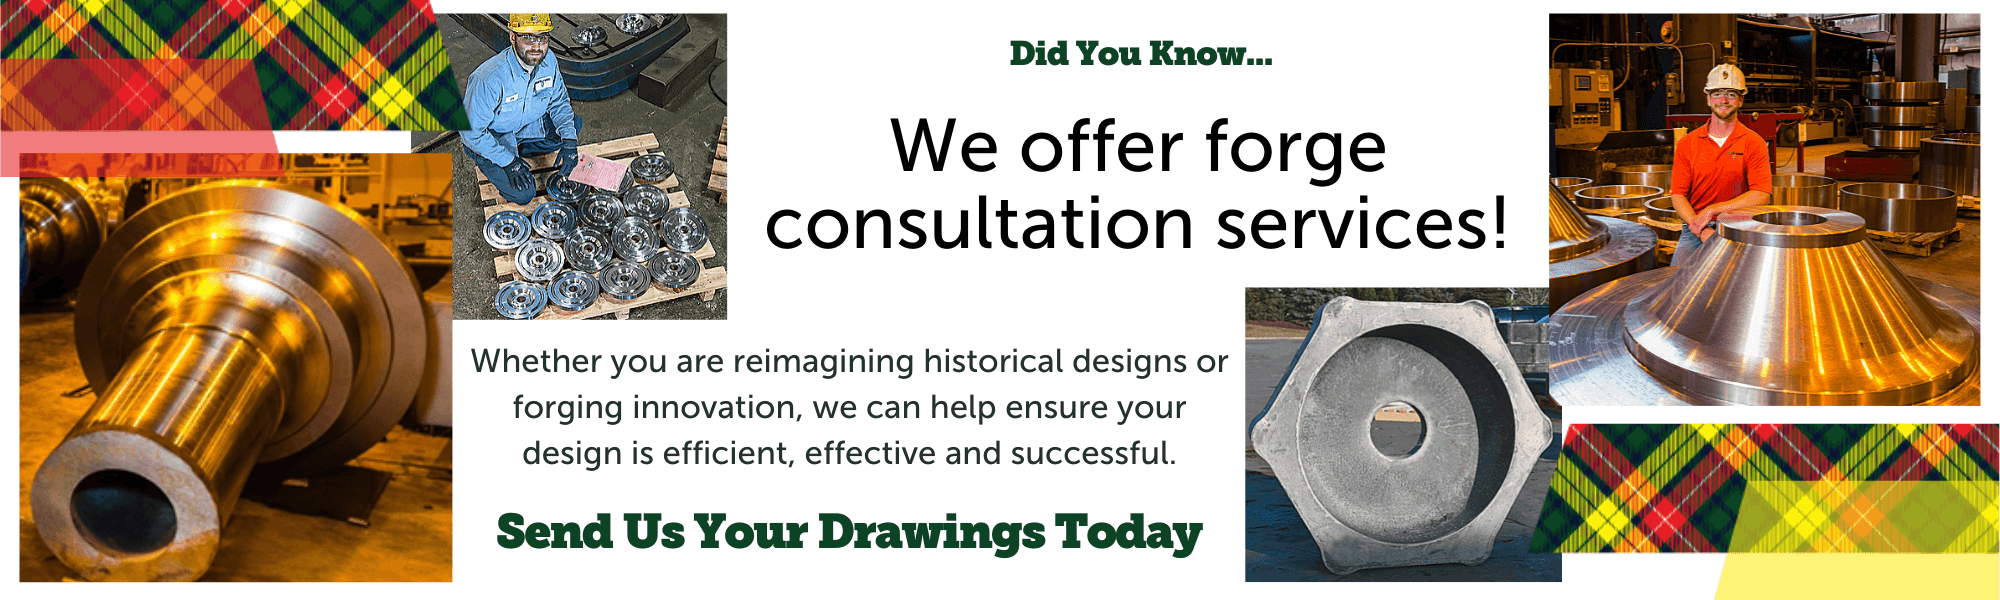 Forge Consultation Services Banner